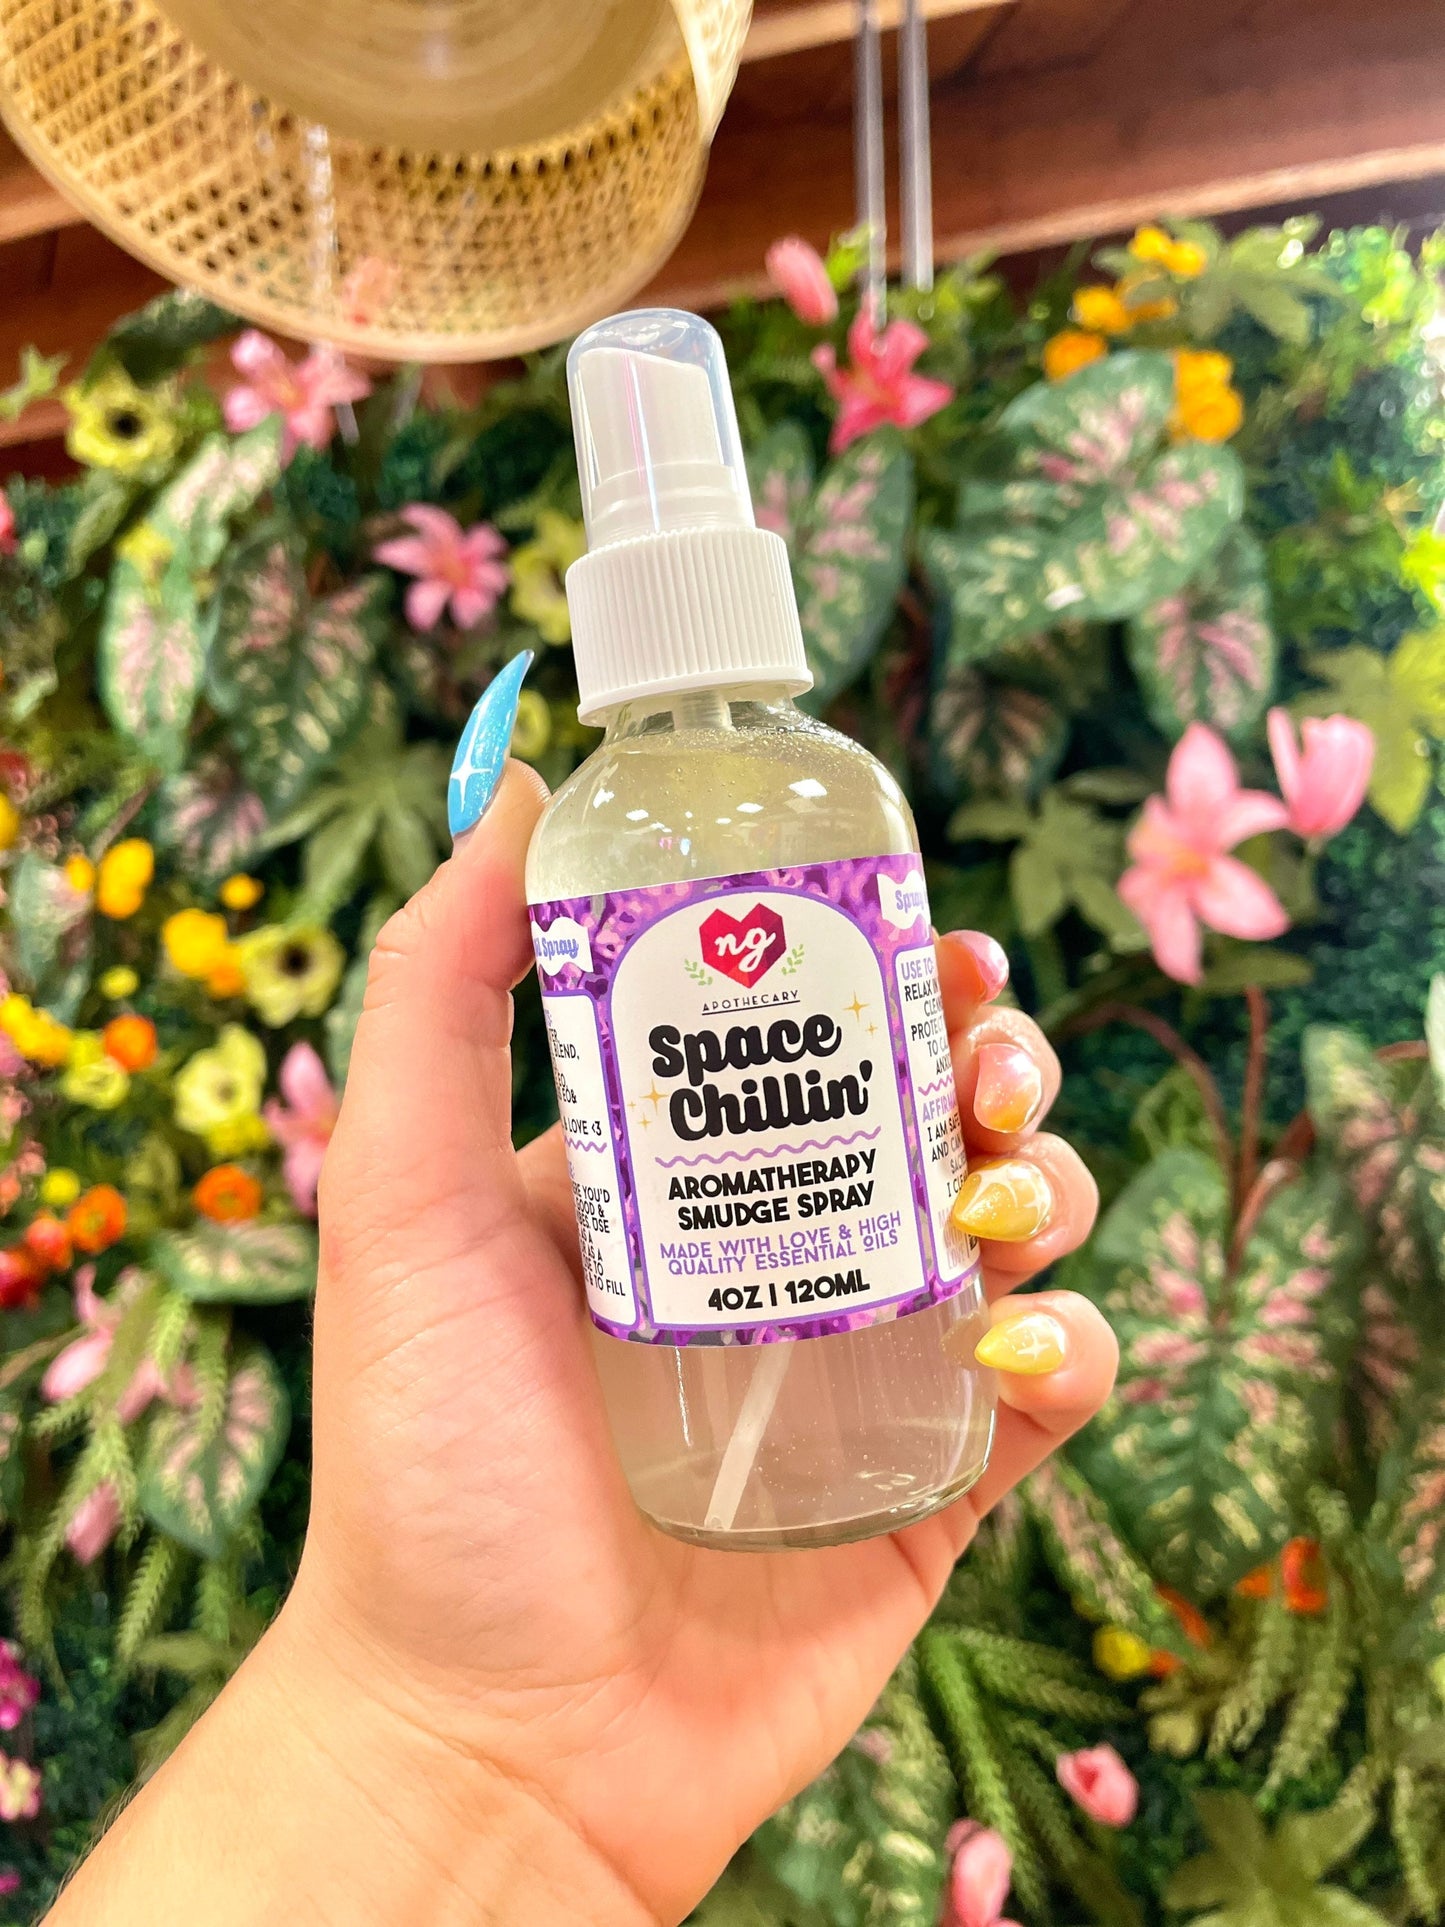 Space Chillin’ Essential Oil Aromatherapy Smudge Spray